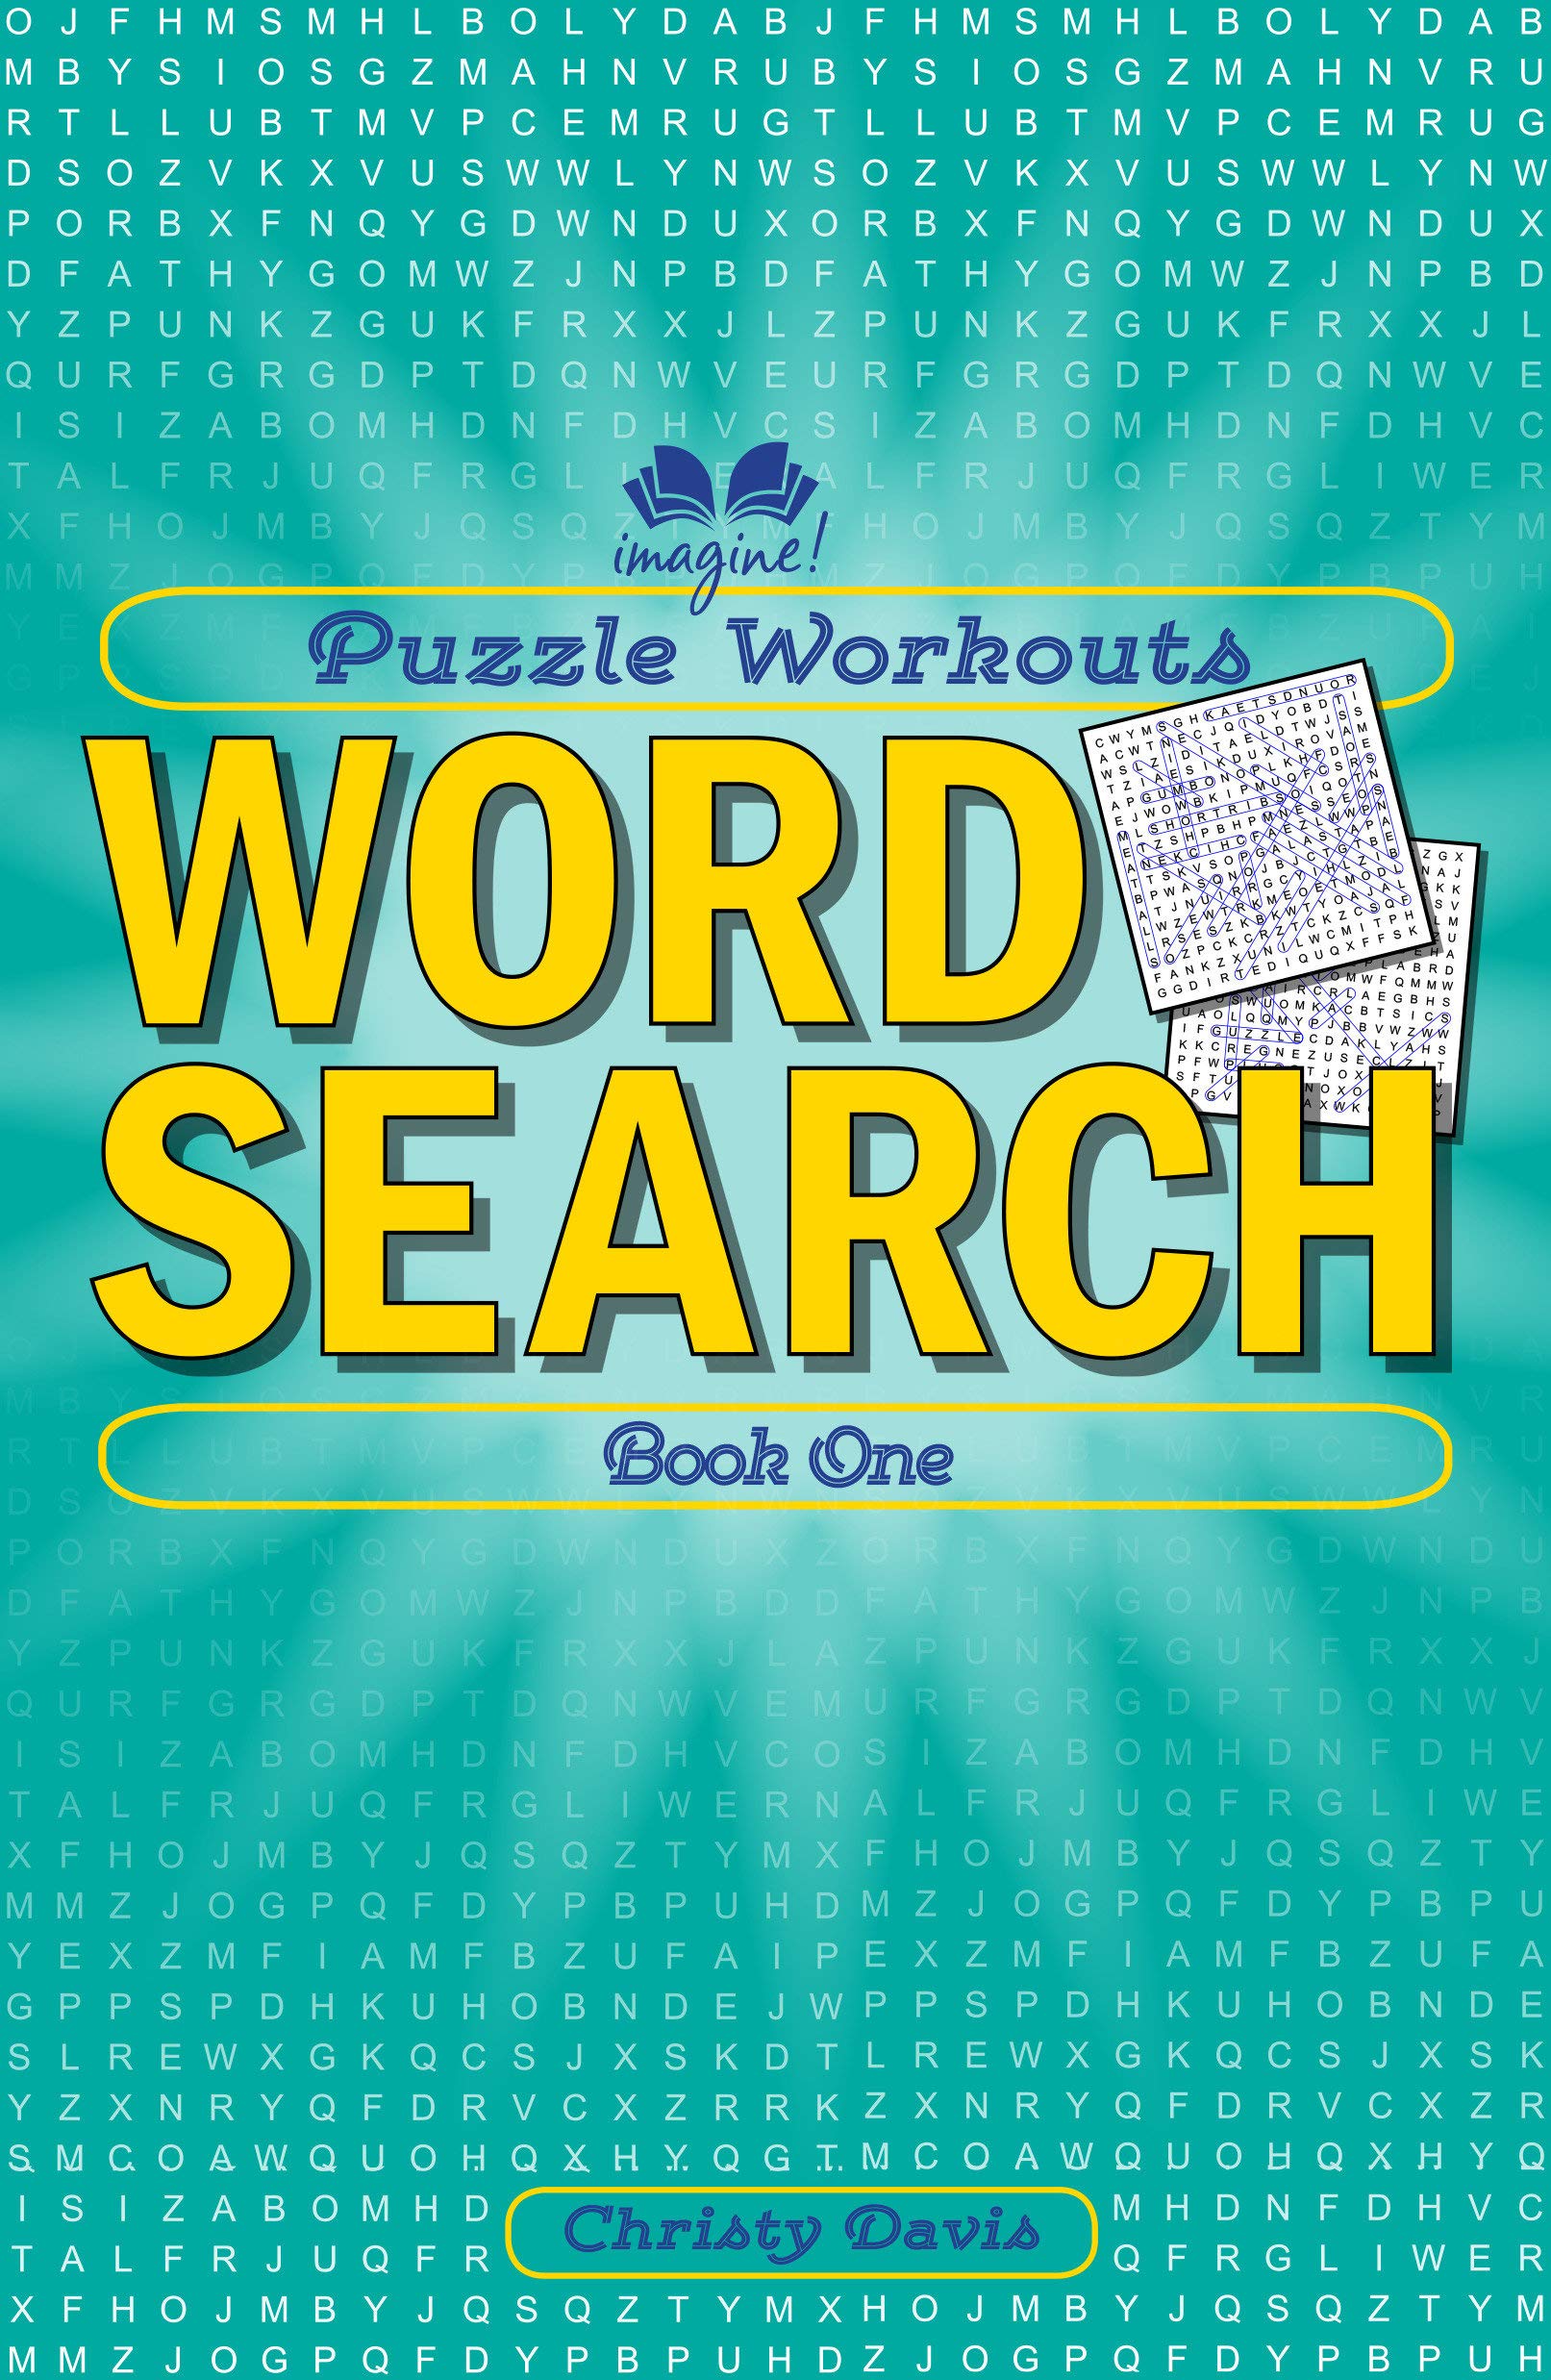 Sách - Puzzle Workouts: Word Search (Book One) - Phương Nam Book